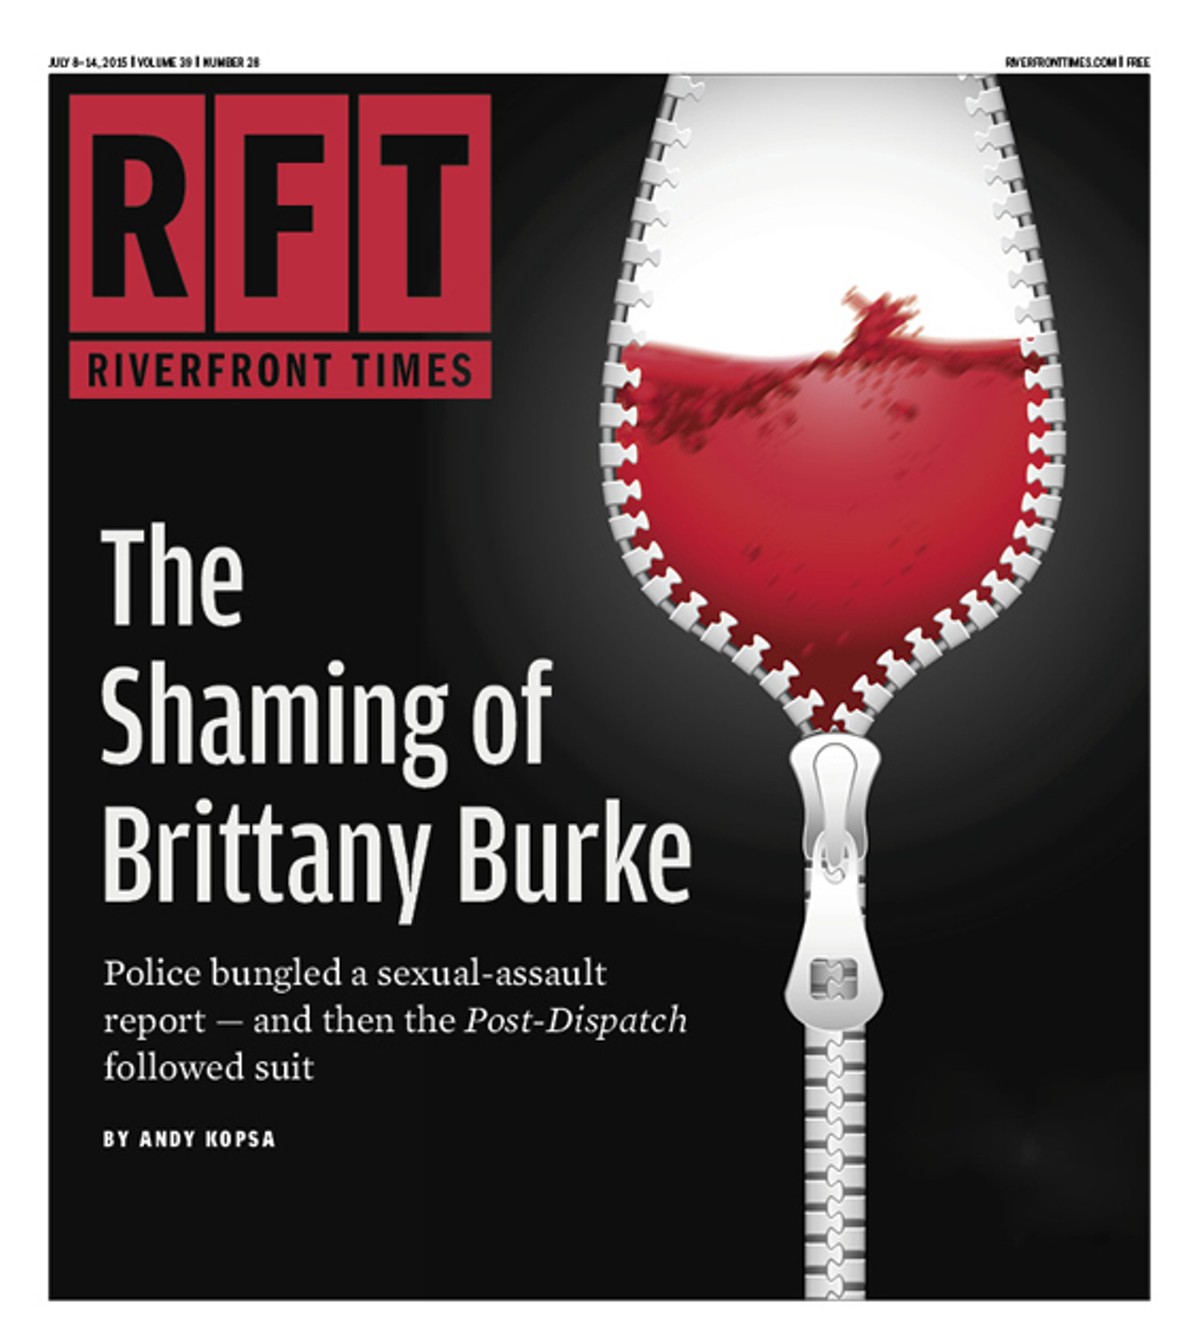 The Cover of the July 8 Print Edition